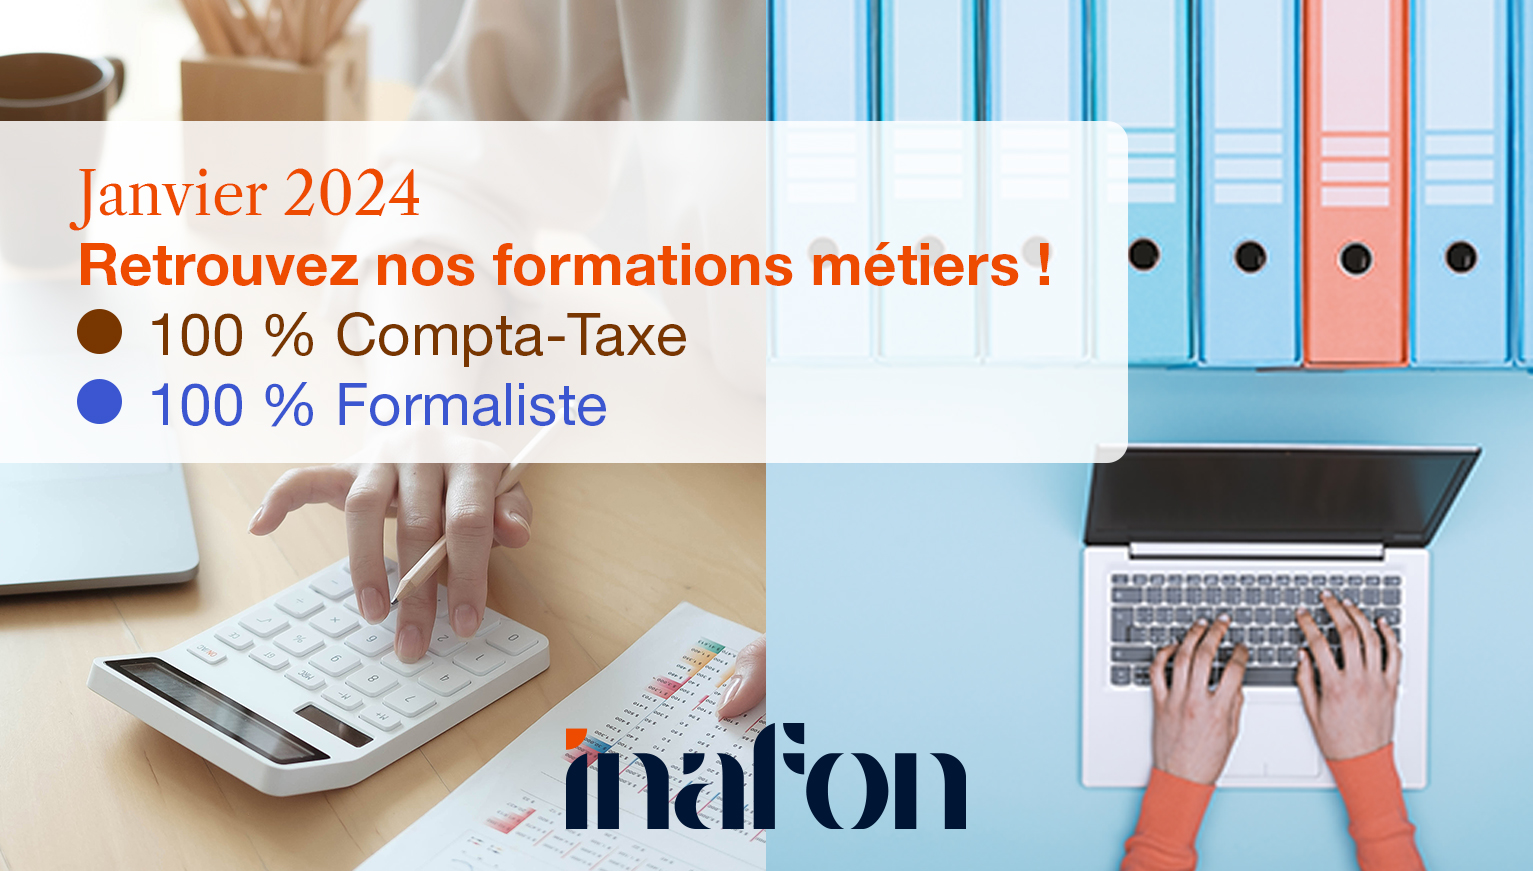 actu-inafon-formations-metiers-2024-65522a830a7ad178050359.jpg